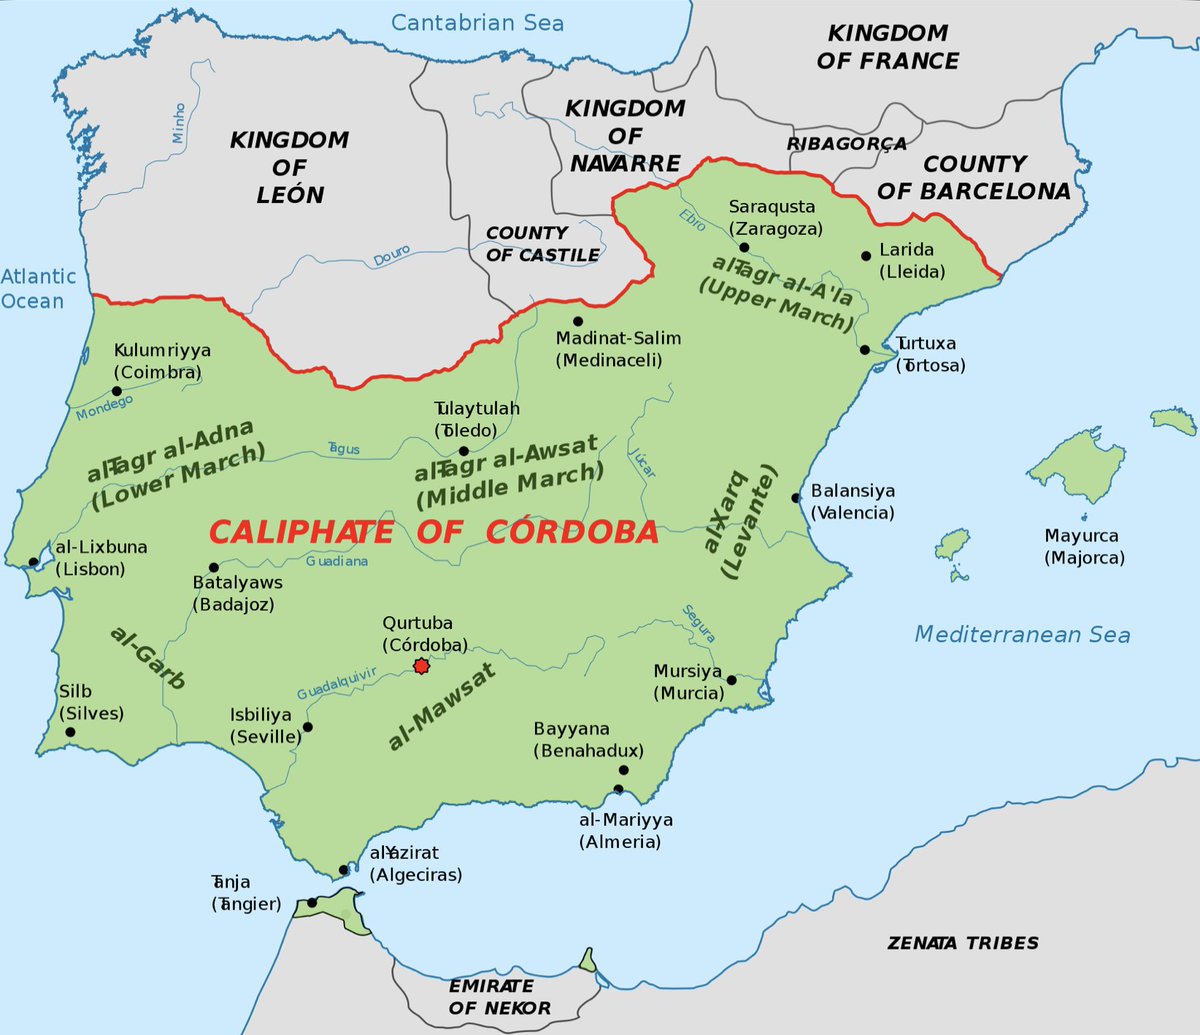 The Great Conjunction and the rise and fall of kingdoms: a mini-thread on the Caliphate of Córdoba.In 929 AD, the Emir of Córdoba decided to declare himself Caliph. The Caliphate ultimately comprised parts of Gibraltar, Morocco and vast swaths of Spain & Portugal.